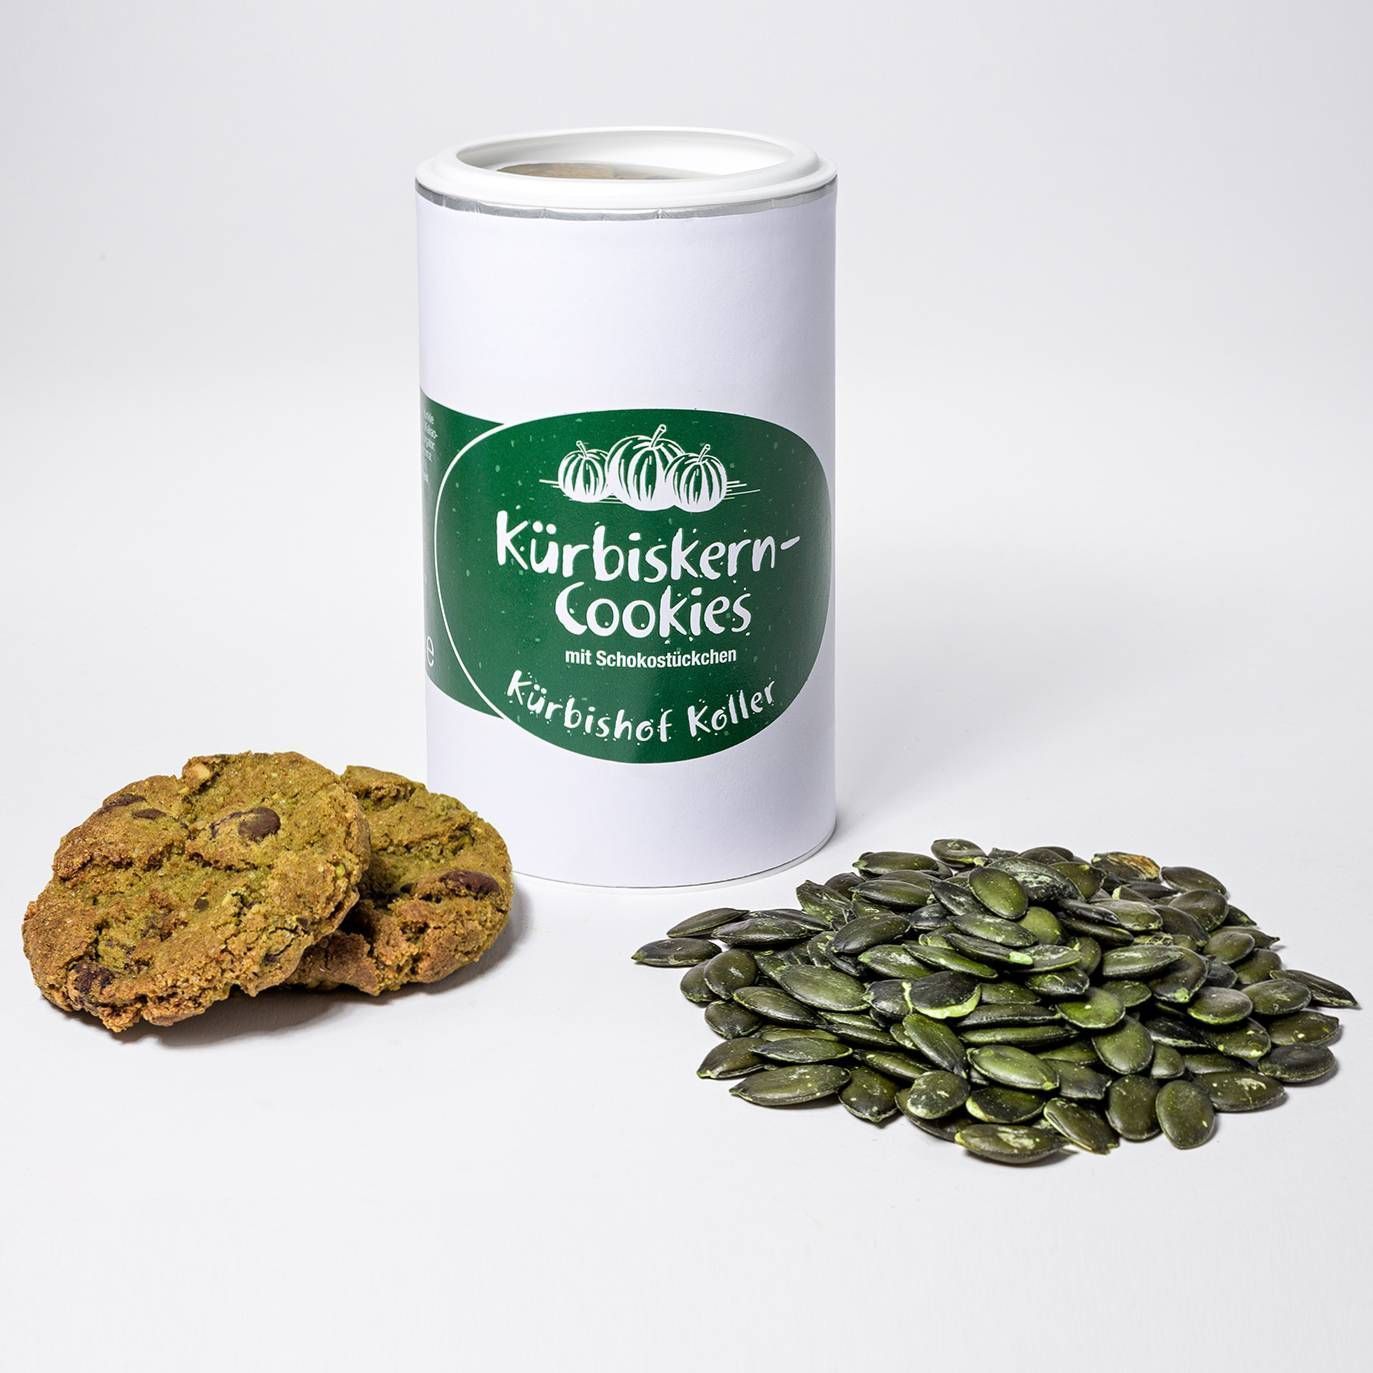 Pumpkin Seed Cookies with Chocolate Chips in the United States of America